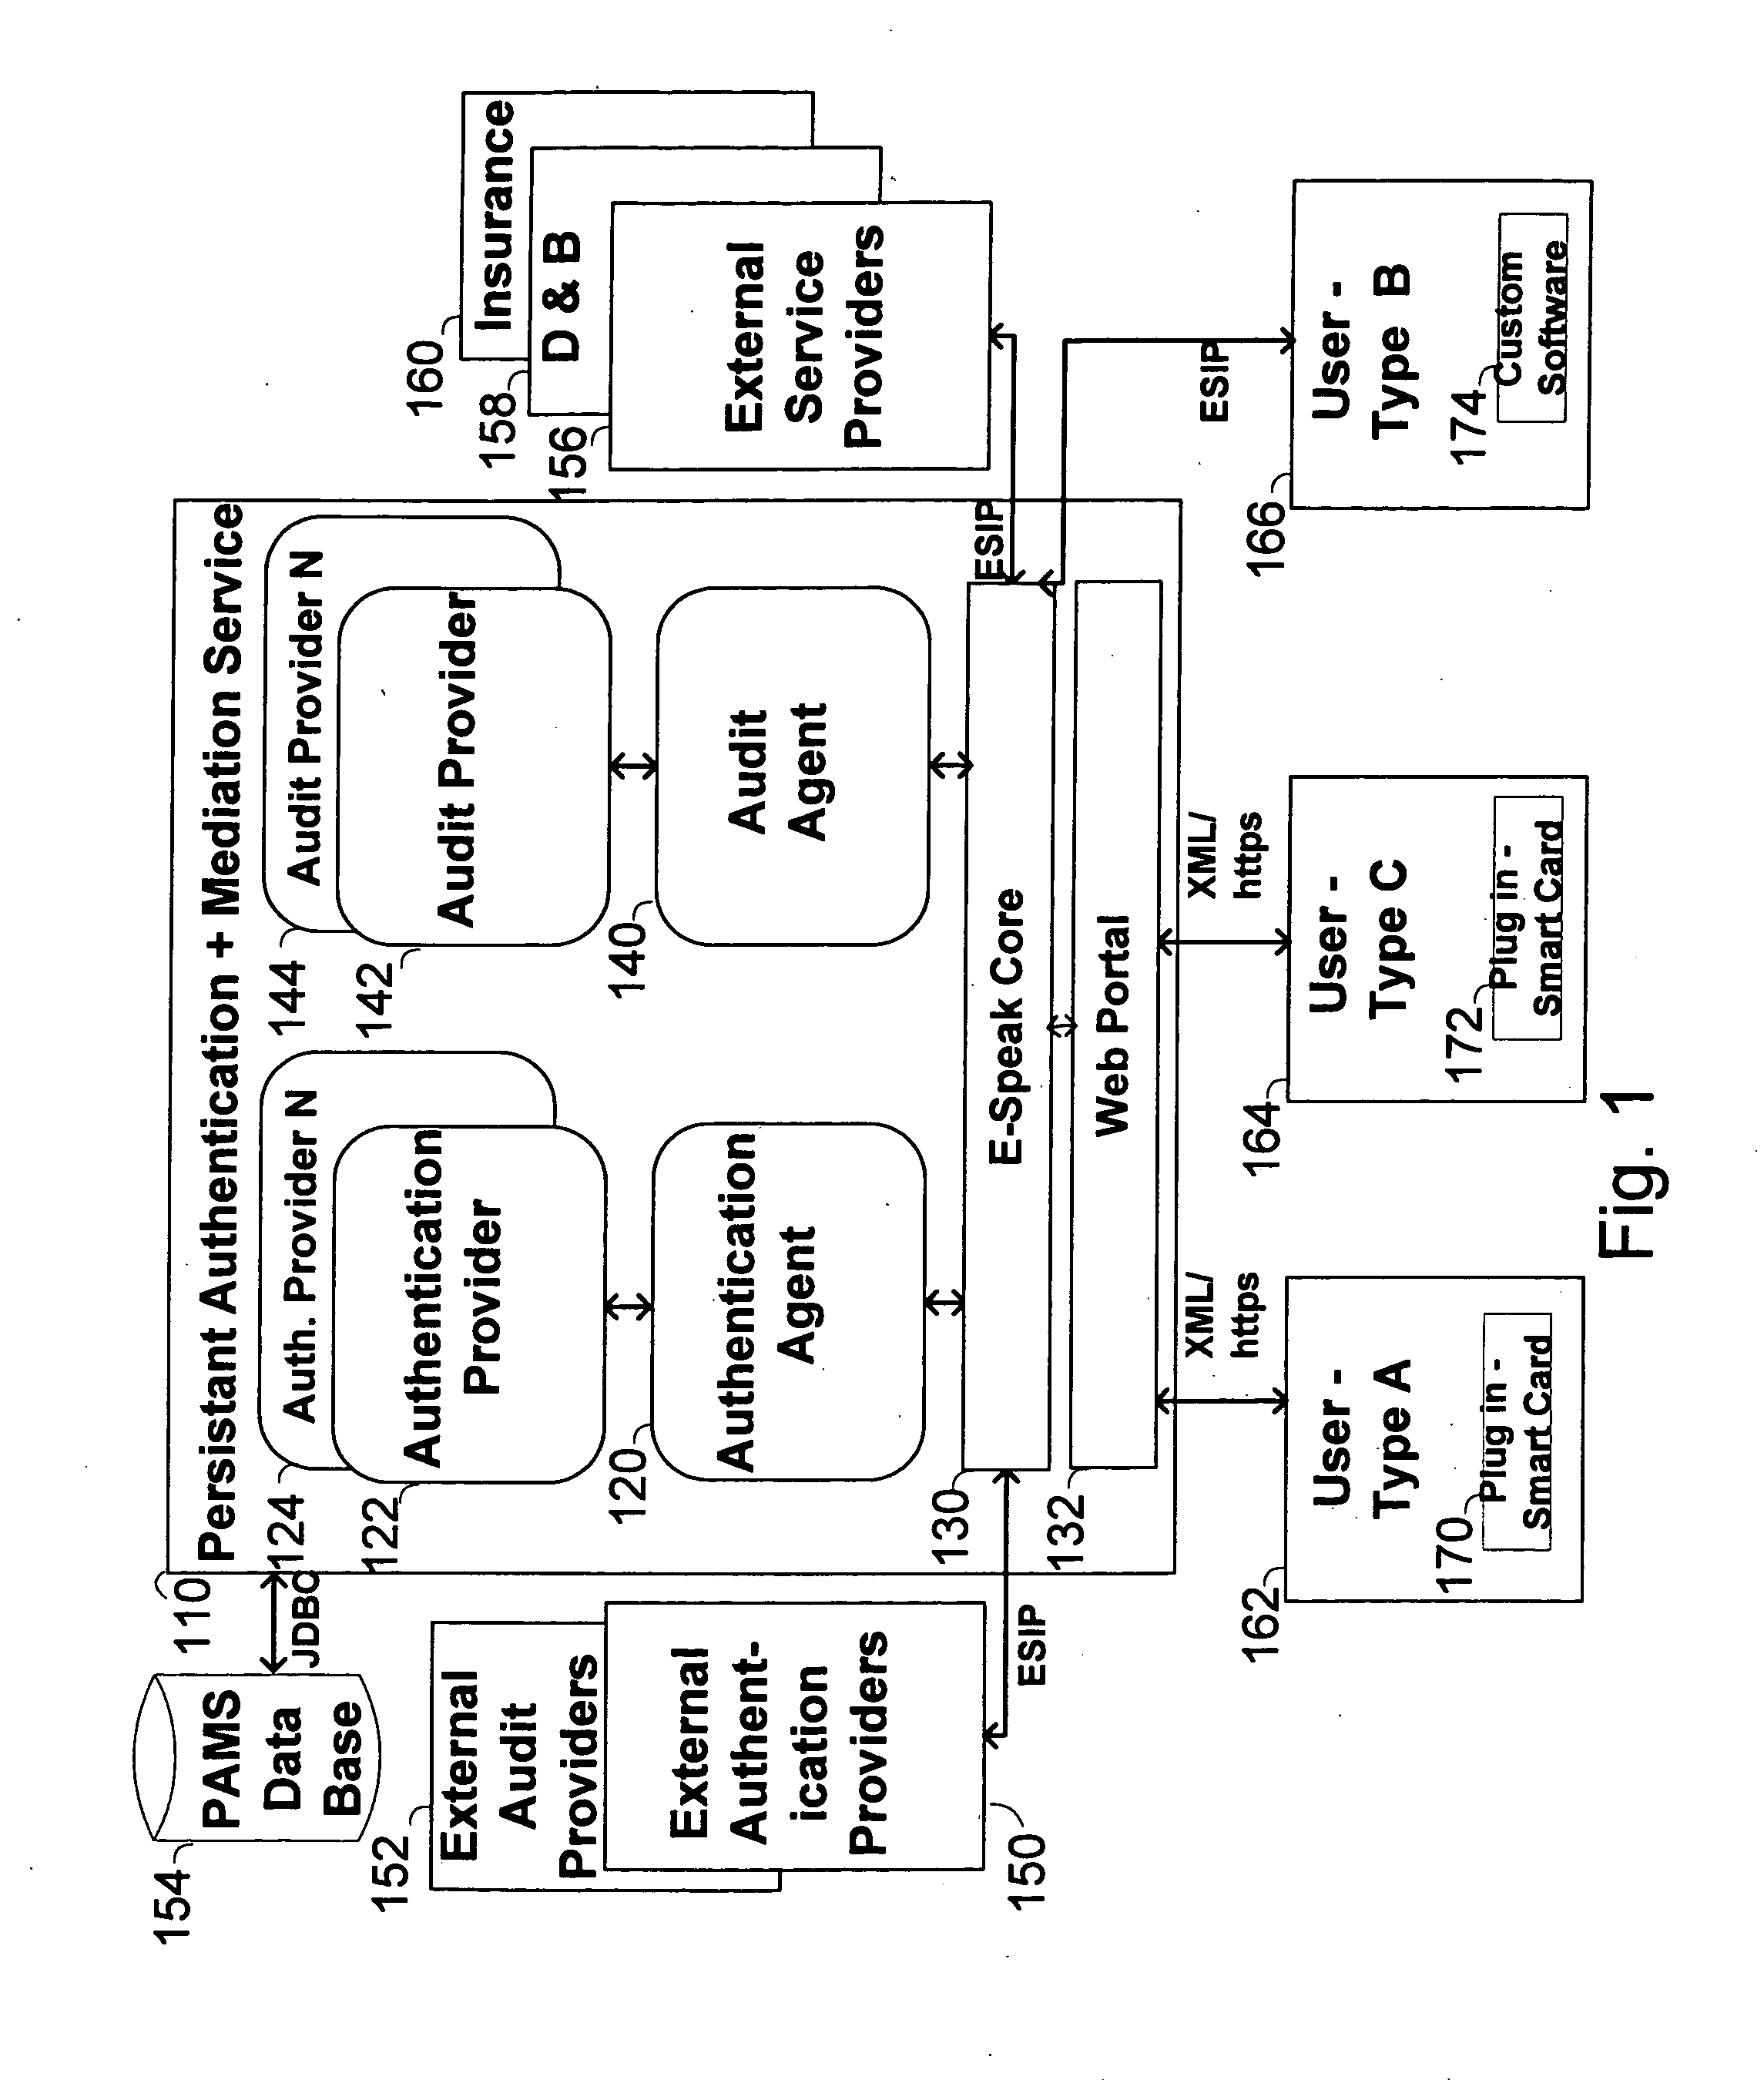 Method, system and service for conducting authenticated business transactions